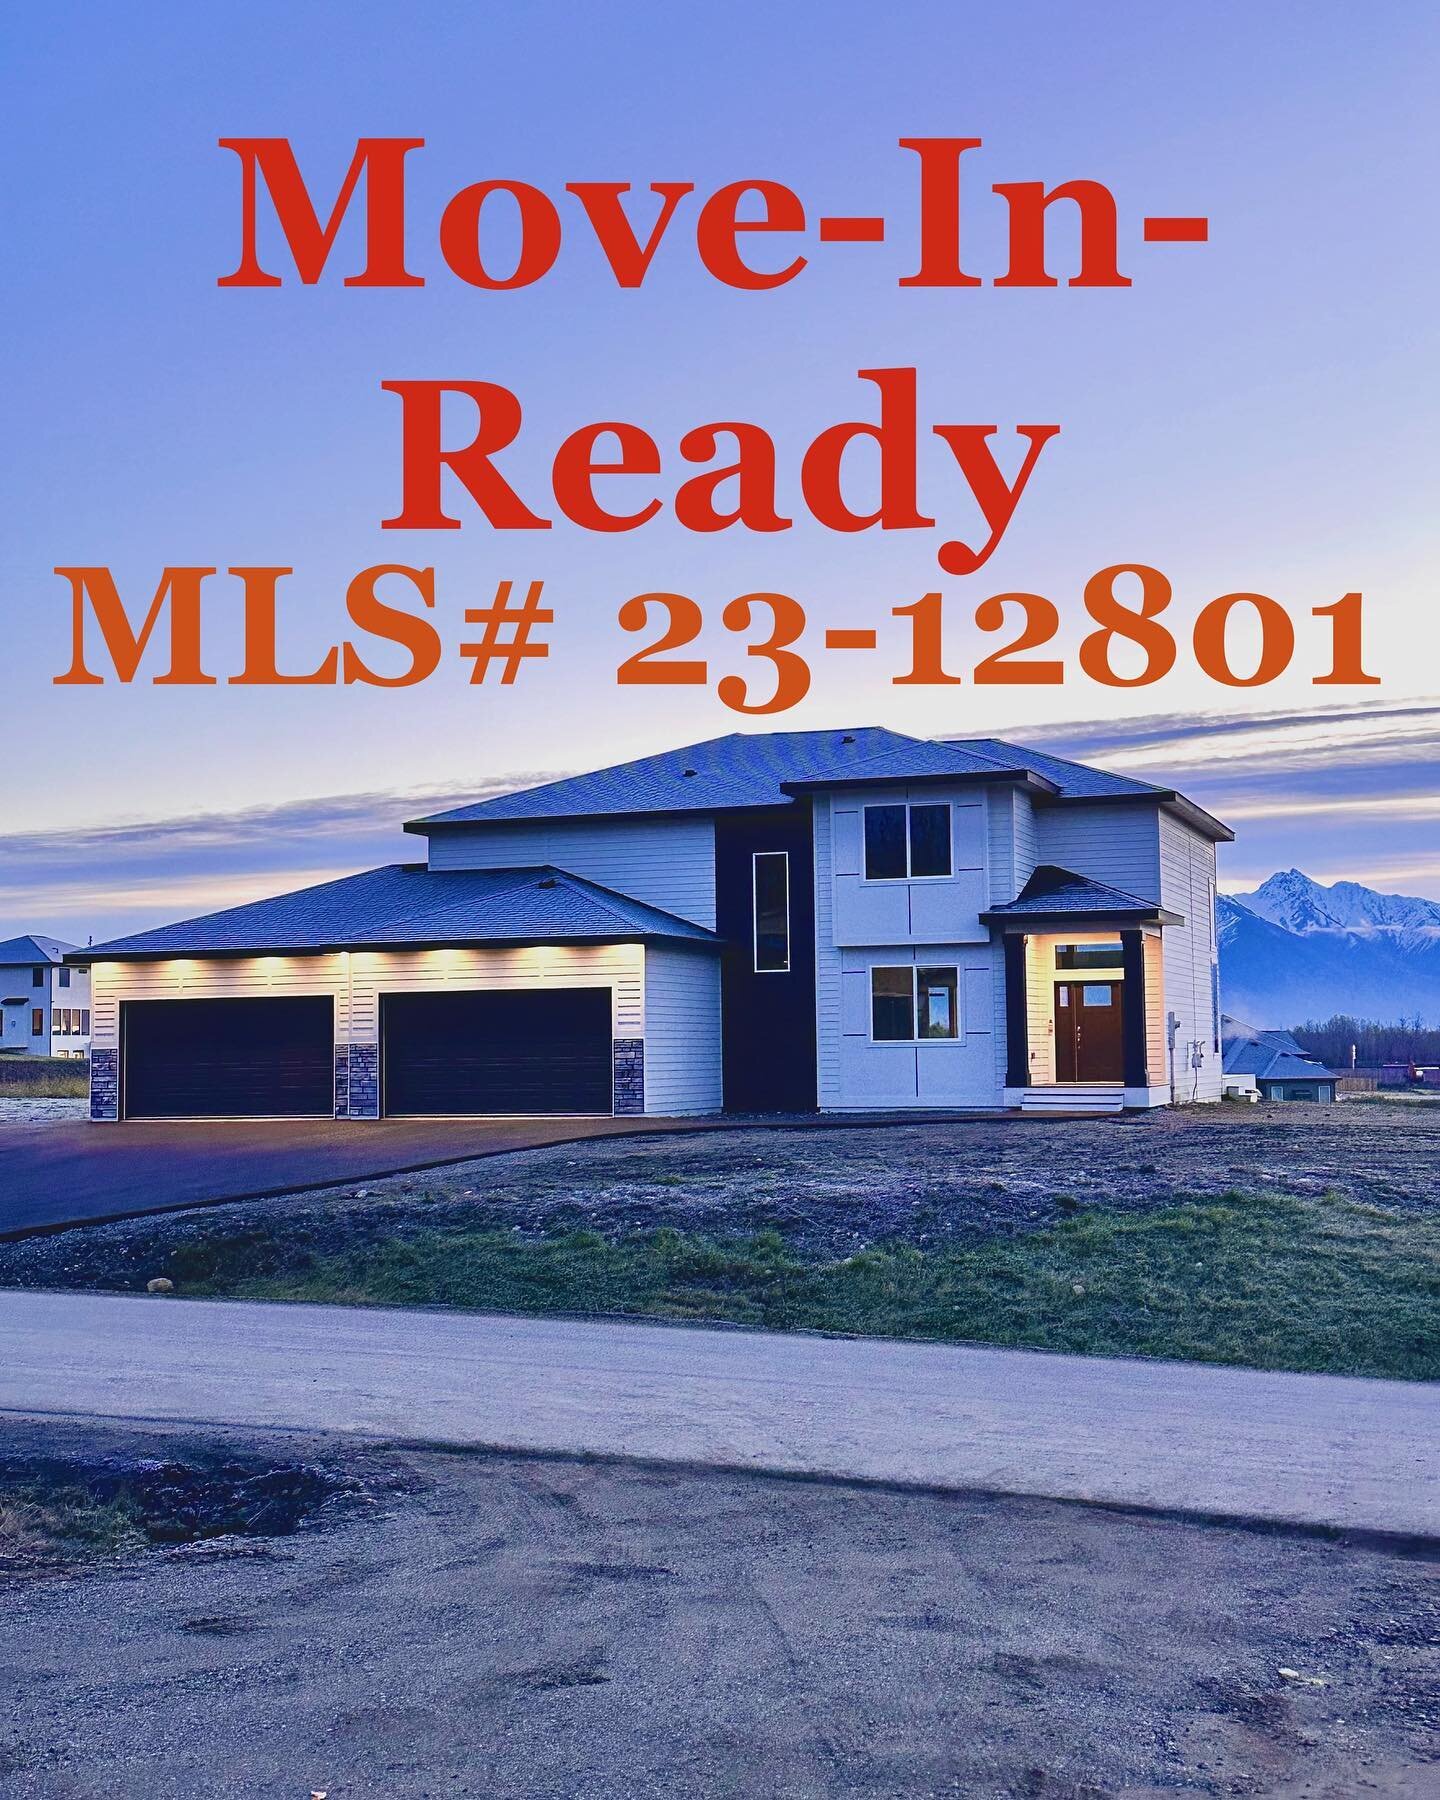 Move - In - Ready @viewpointealaska has STEM School, community water, Gig Internet, Natural Gas and Street Lights. 

Bring your agent and check out this Custom Home. Easy commute to JBER and Anchorage. 

#jber #anchorage #anchoragehomebuilders #matsu